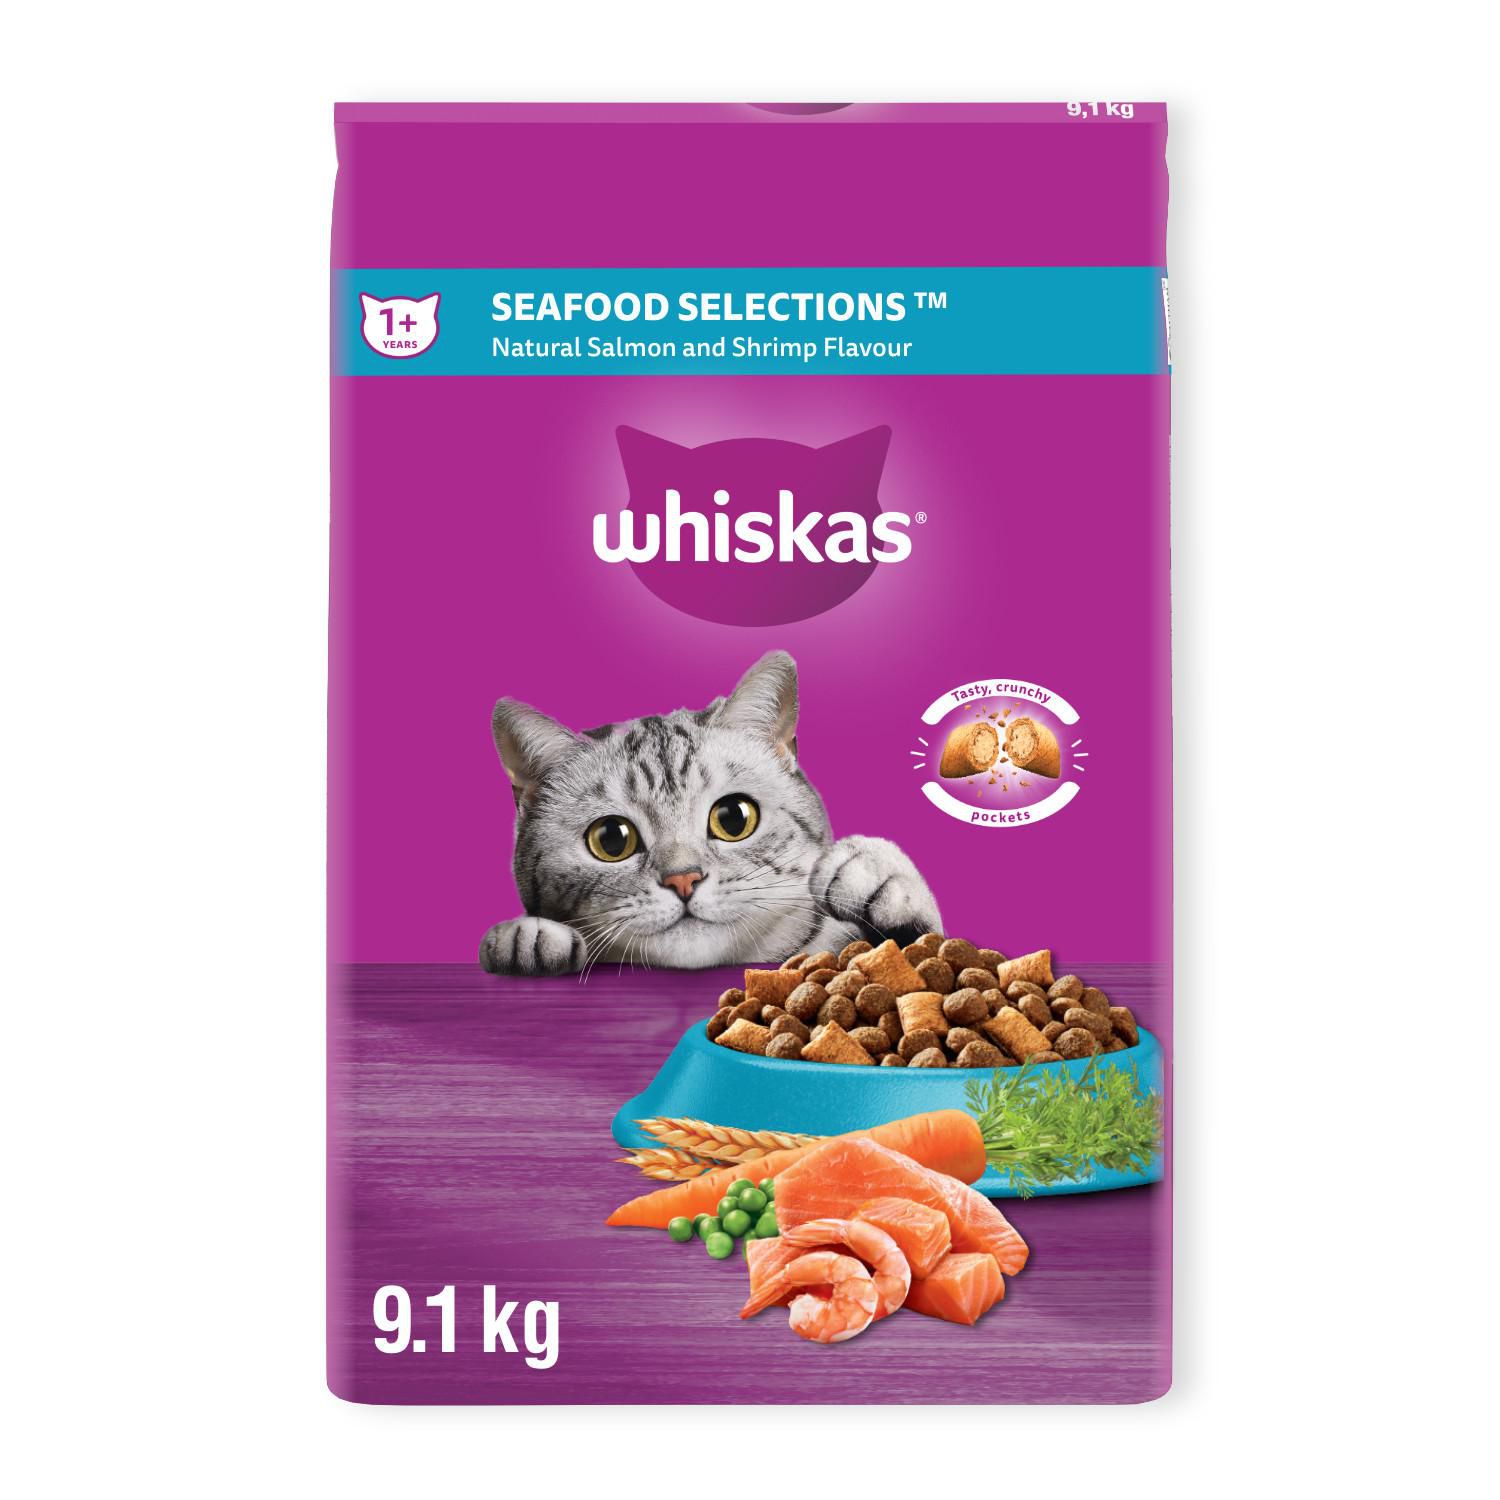 Whiskas Seafood Selections Salmon & Shrimp Flavour Natural Adult